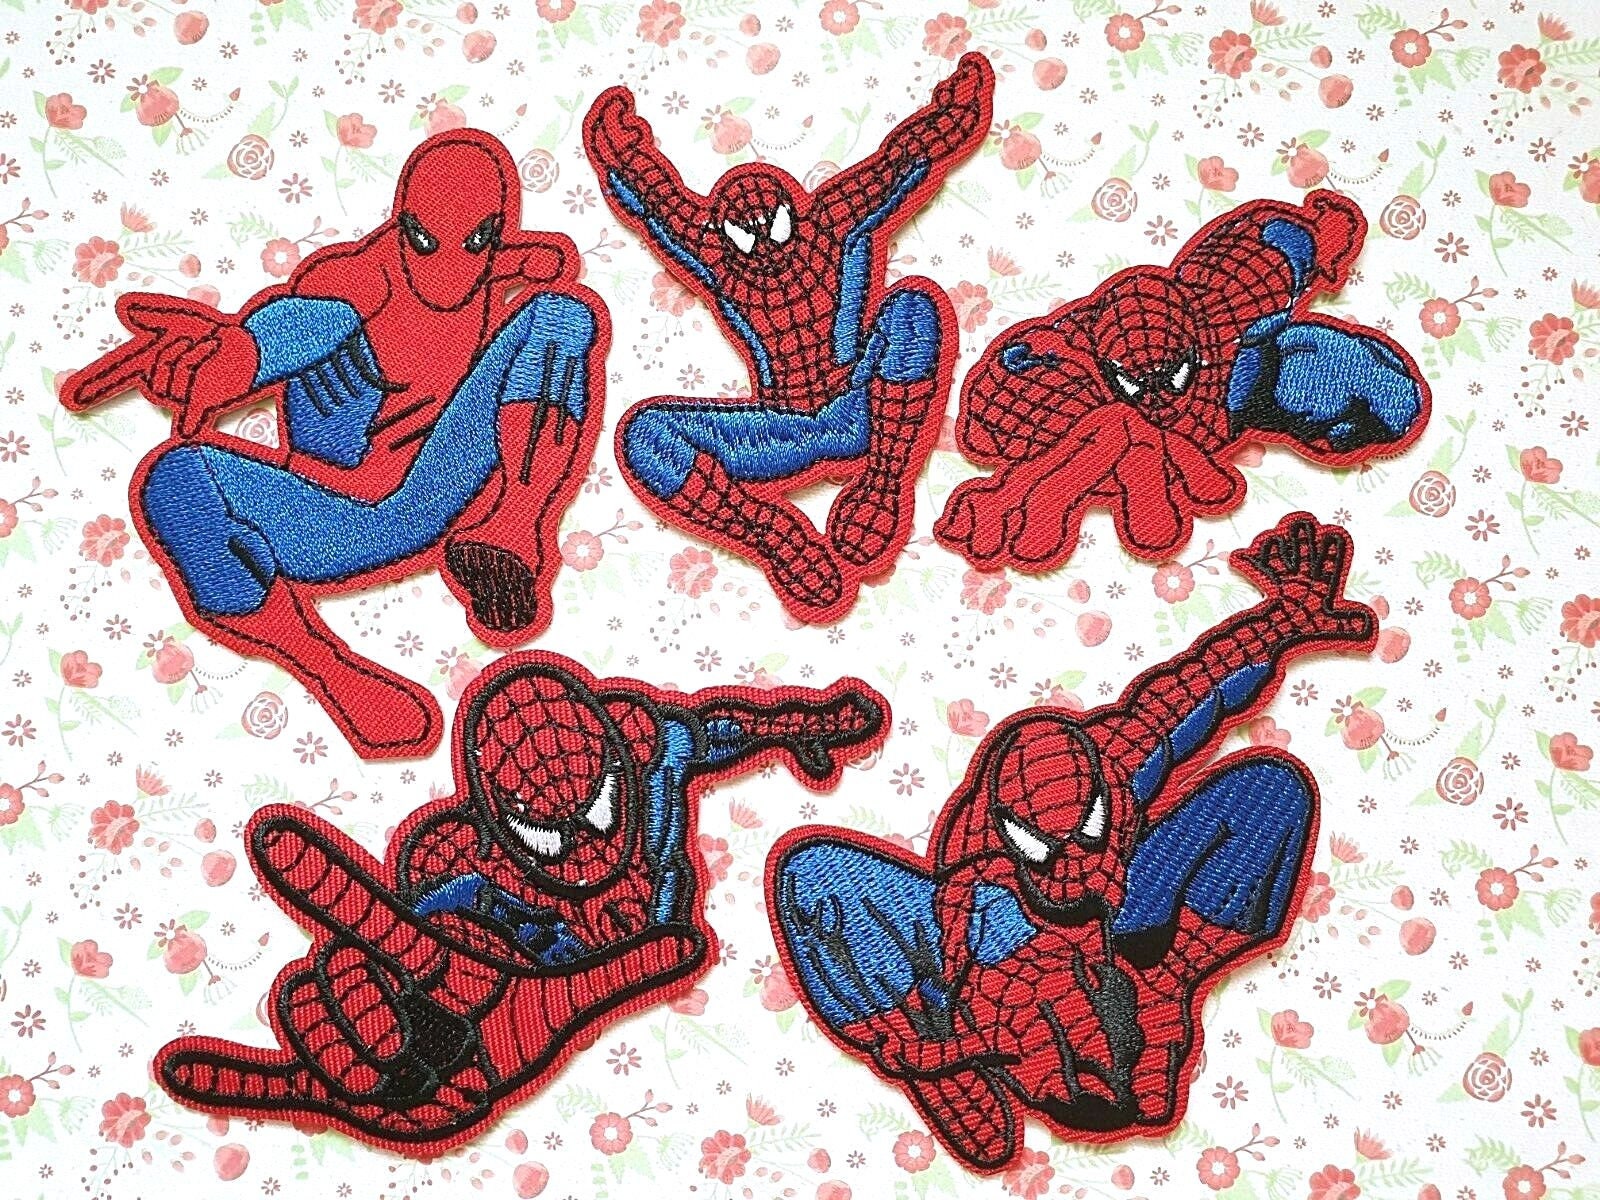 20pcs/set Marvel Superhero Iron On Patches For Clothes Decorative  Embroidered Sew On Cartoon Anime Spiderman Diy Patches Applique